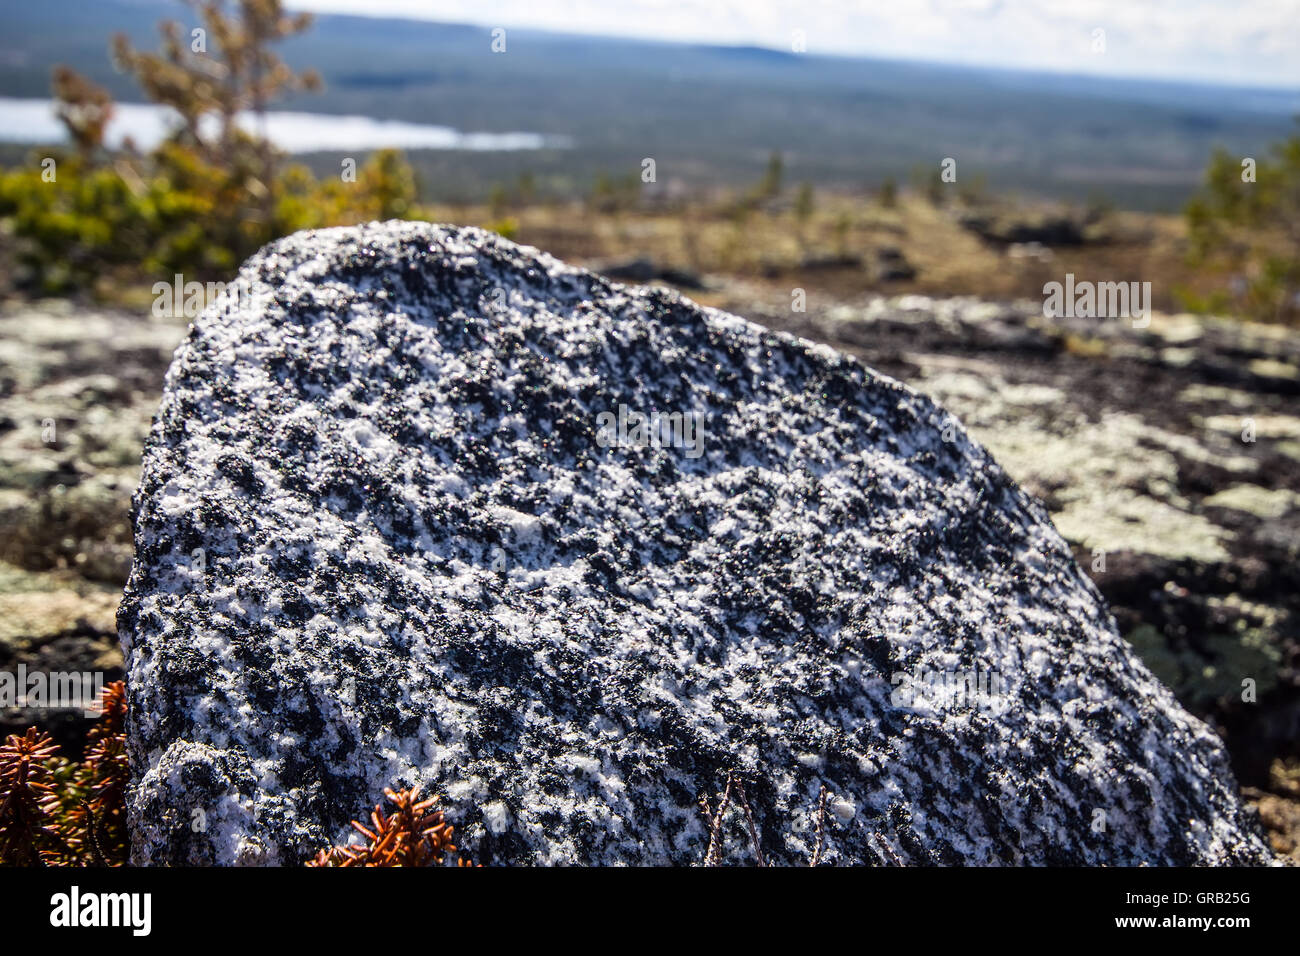 site of rocks and rare specific plants. Low camera position Stock Photo